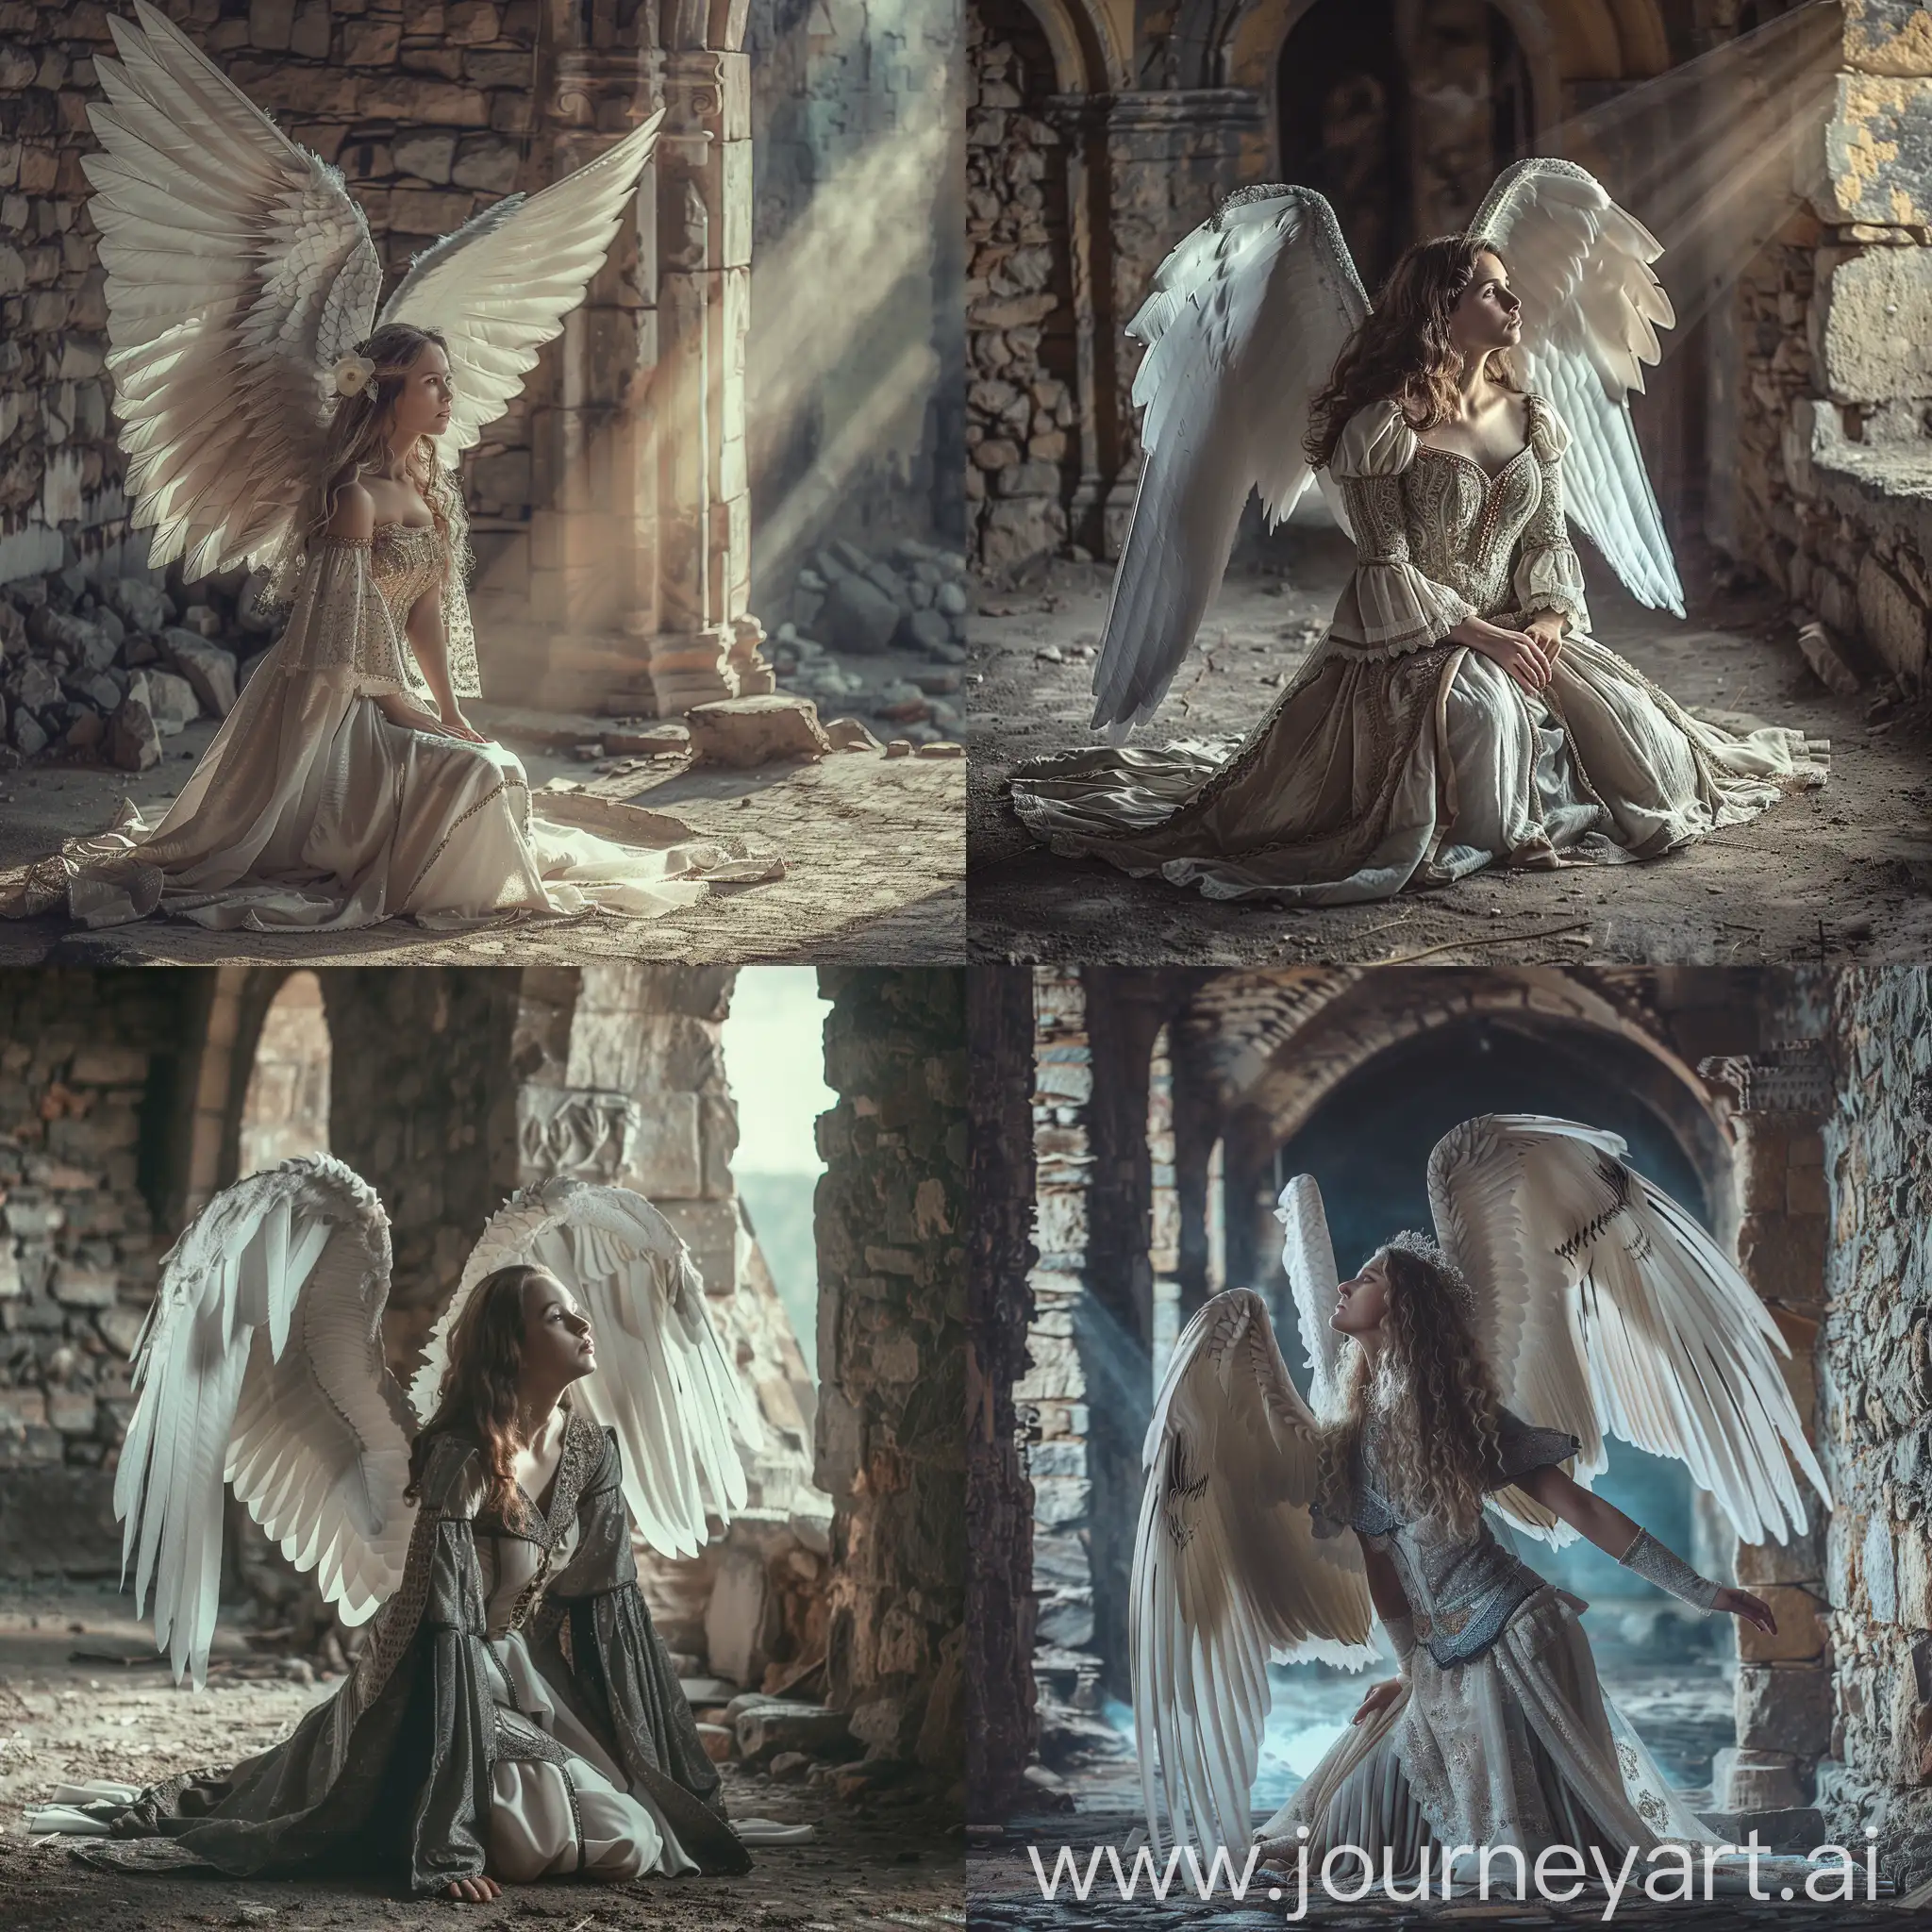 A beautiful Angel woman  with large white wings and  medieval dress on her knees in a ancient stone castle. . Emotional cinematic scene using grayish dark tones and muted colors, god ray